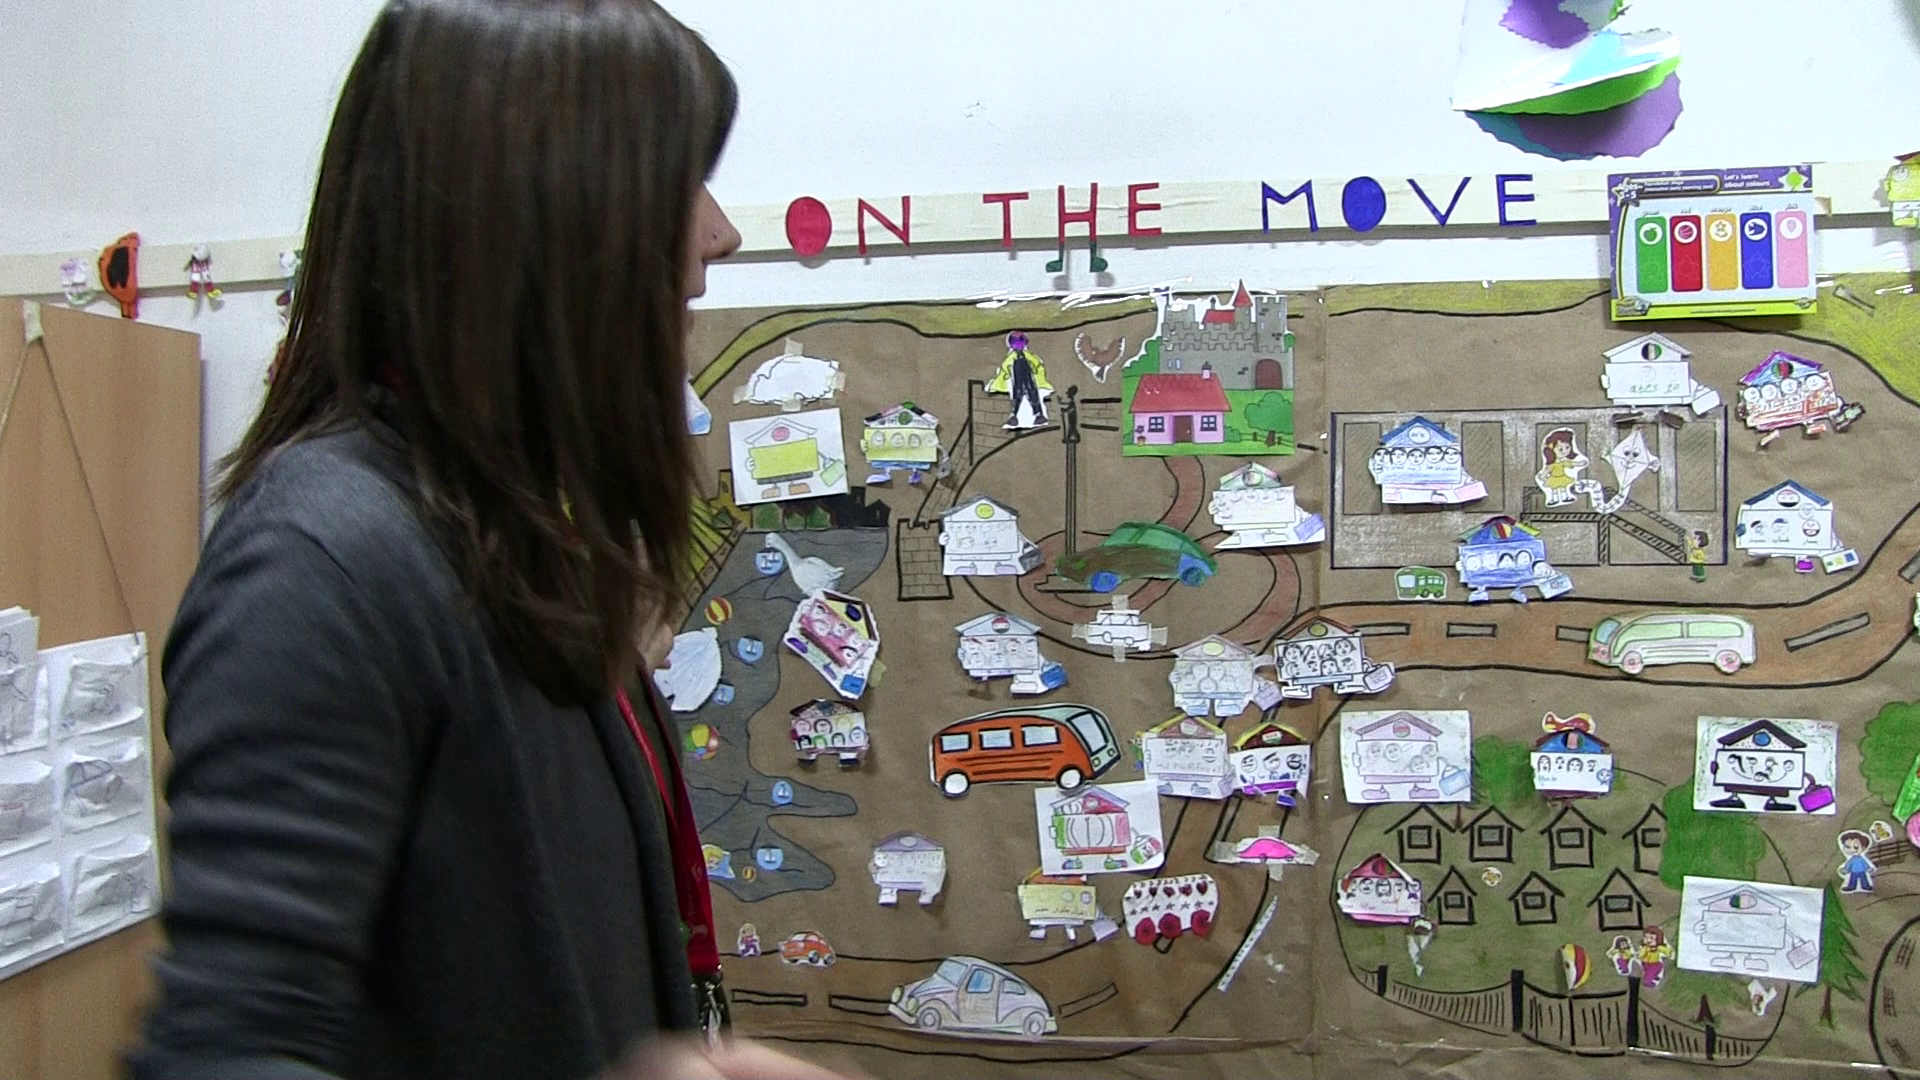 Tatjana, Save the Children, shows us the ”Home on the move” map